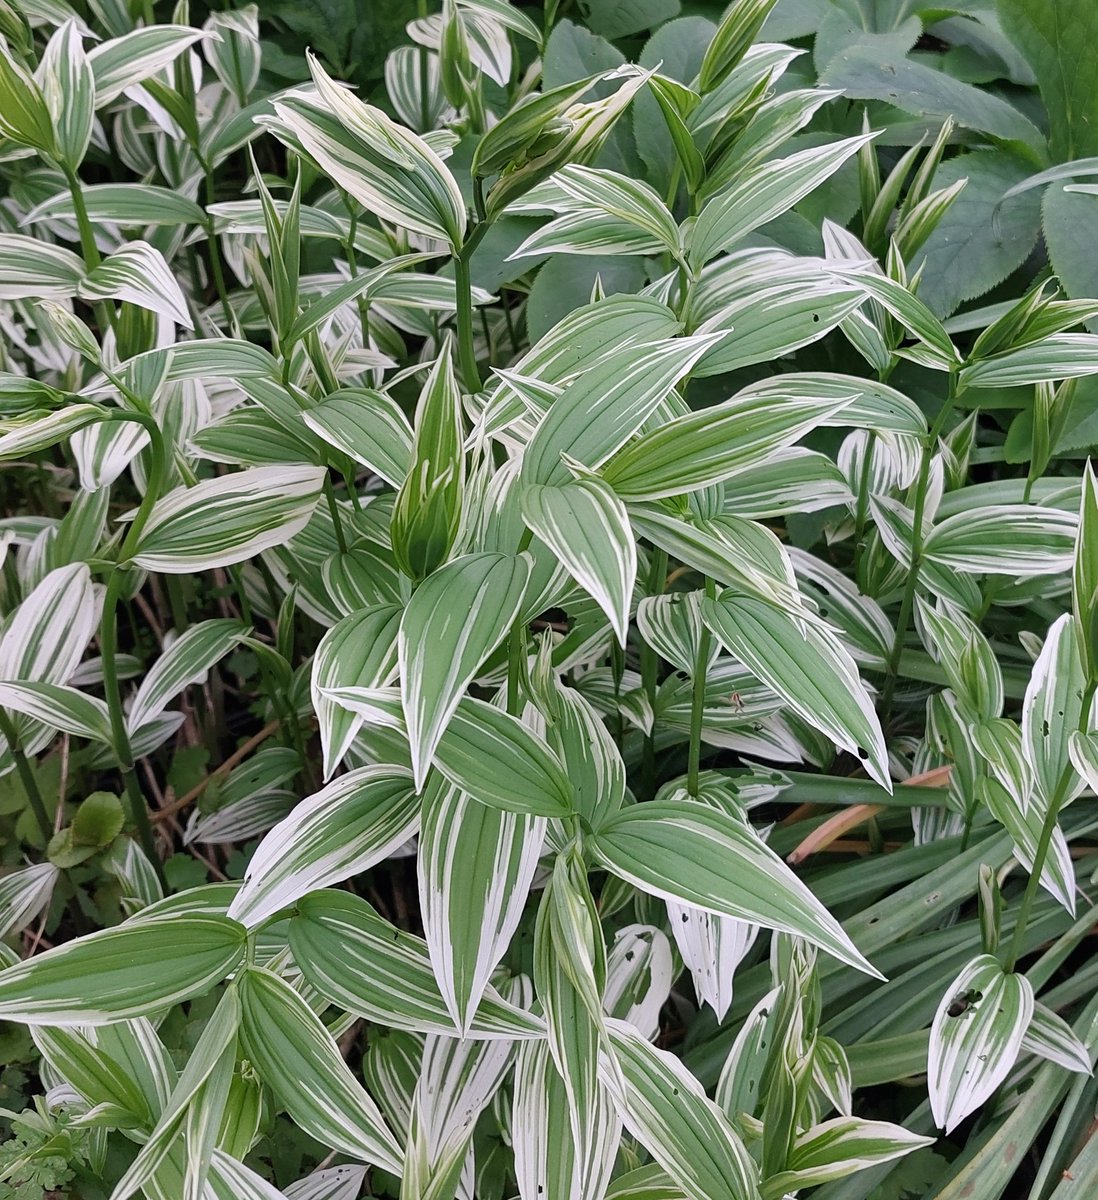 White variegated foliage helps brighten up shady areas and thus Disporum sessile 'Variegatum' is no exception. Will wander in damper areas but clump forming here. #disporum #disporumsessile #disporumsessilevariegatum #variegated #variegatedplants #shadeplants #woodlandgarden